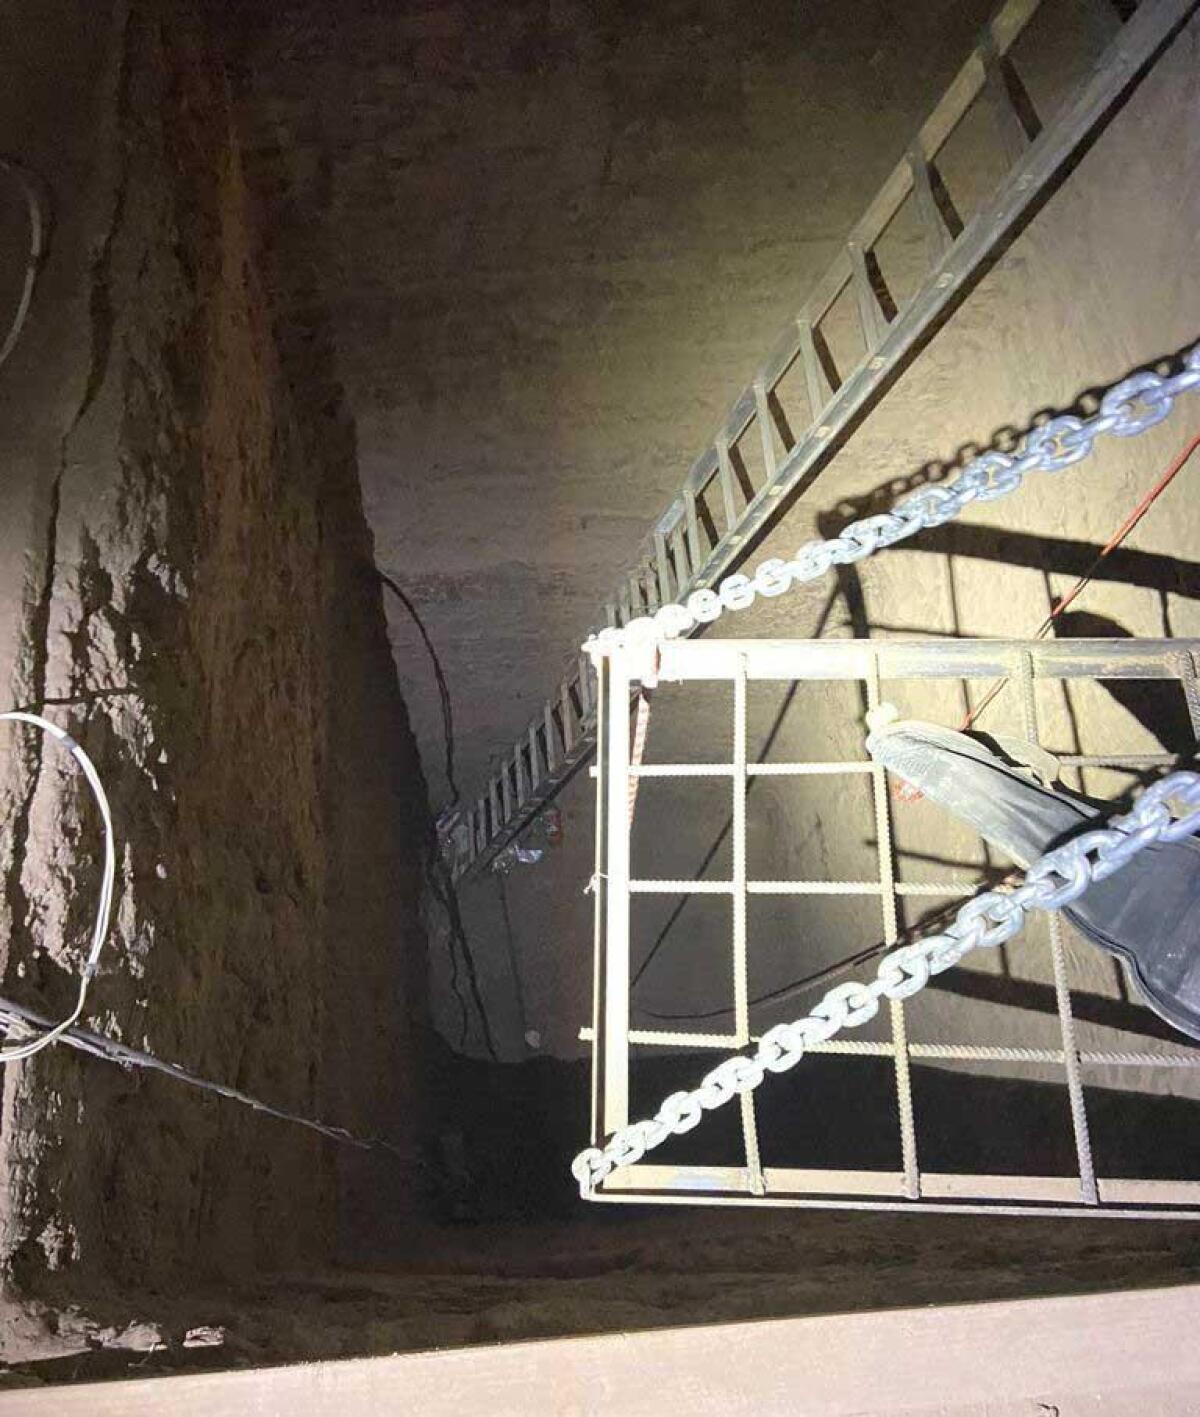 The entrance to the underground tunnel measured 12 feet by 10 feet and was discovered inside a home in Mexicali.